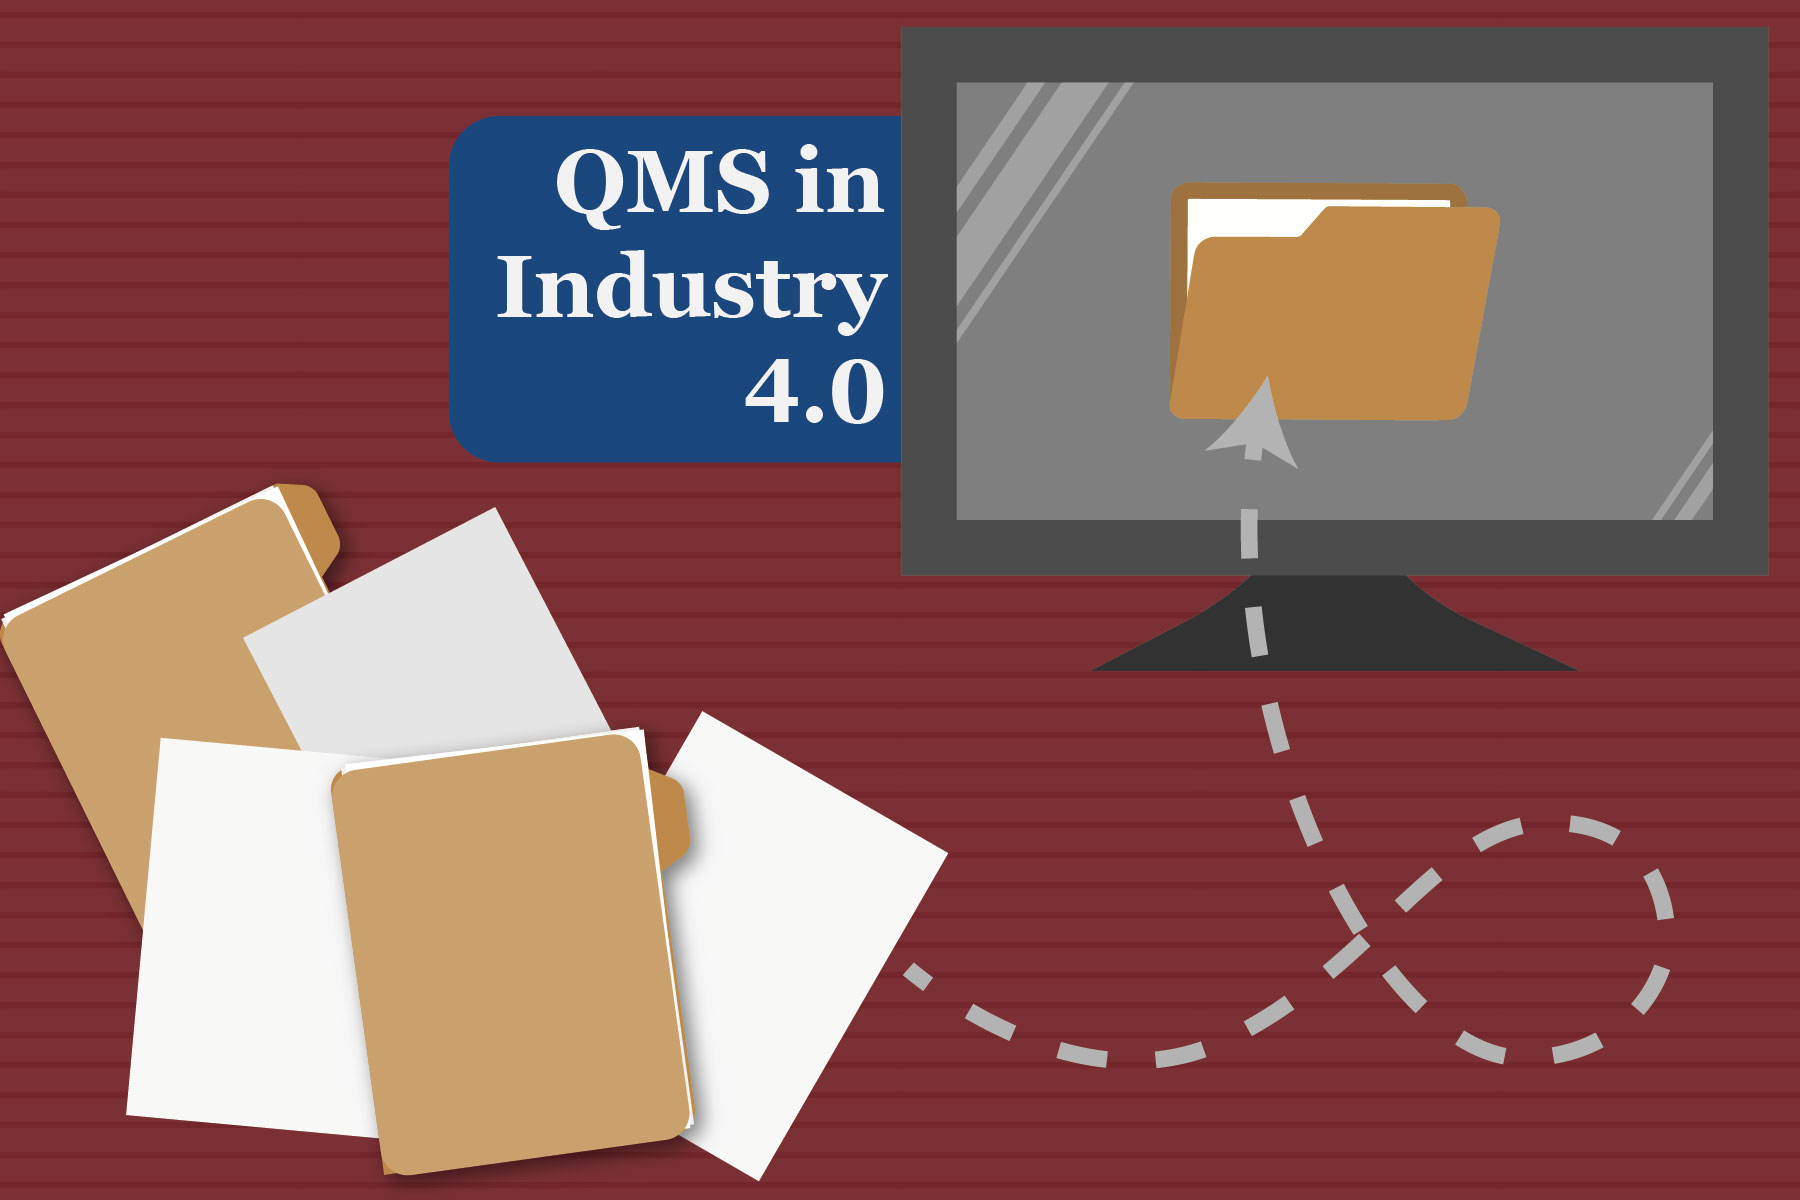 medical device documents being uploaded to a QMS